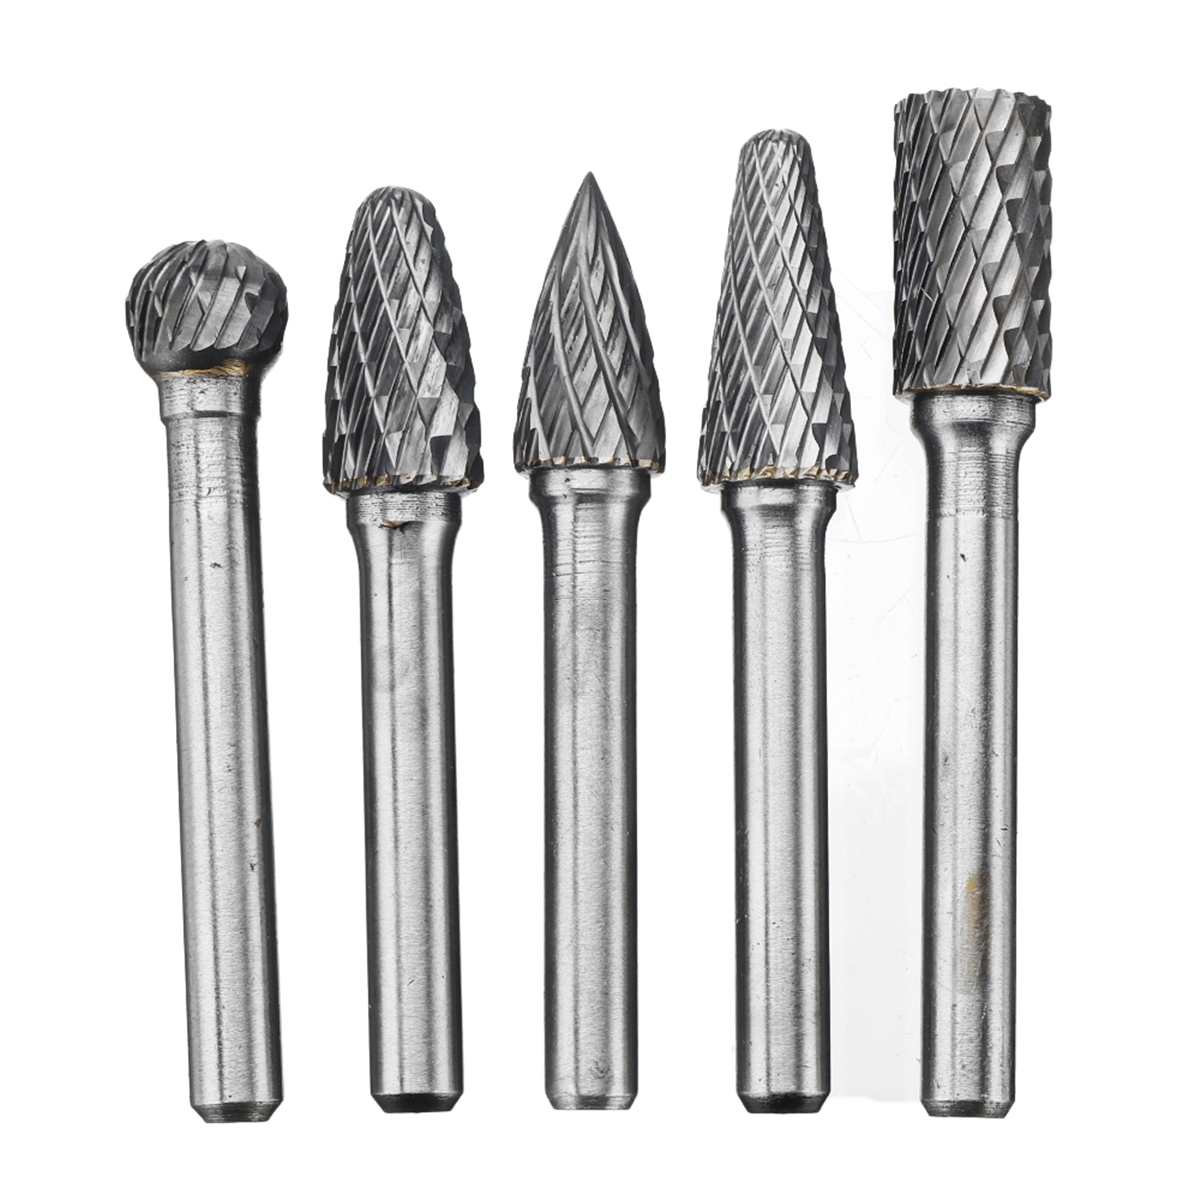 Drillpro-RB29-5pcs-6mm-Shank-Tungsten-Carbide-Burr-Rotary-Cutter-file-Set-Engraving-Tool-1029284-1